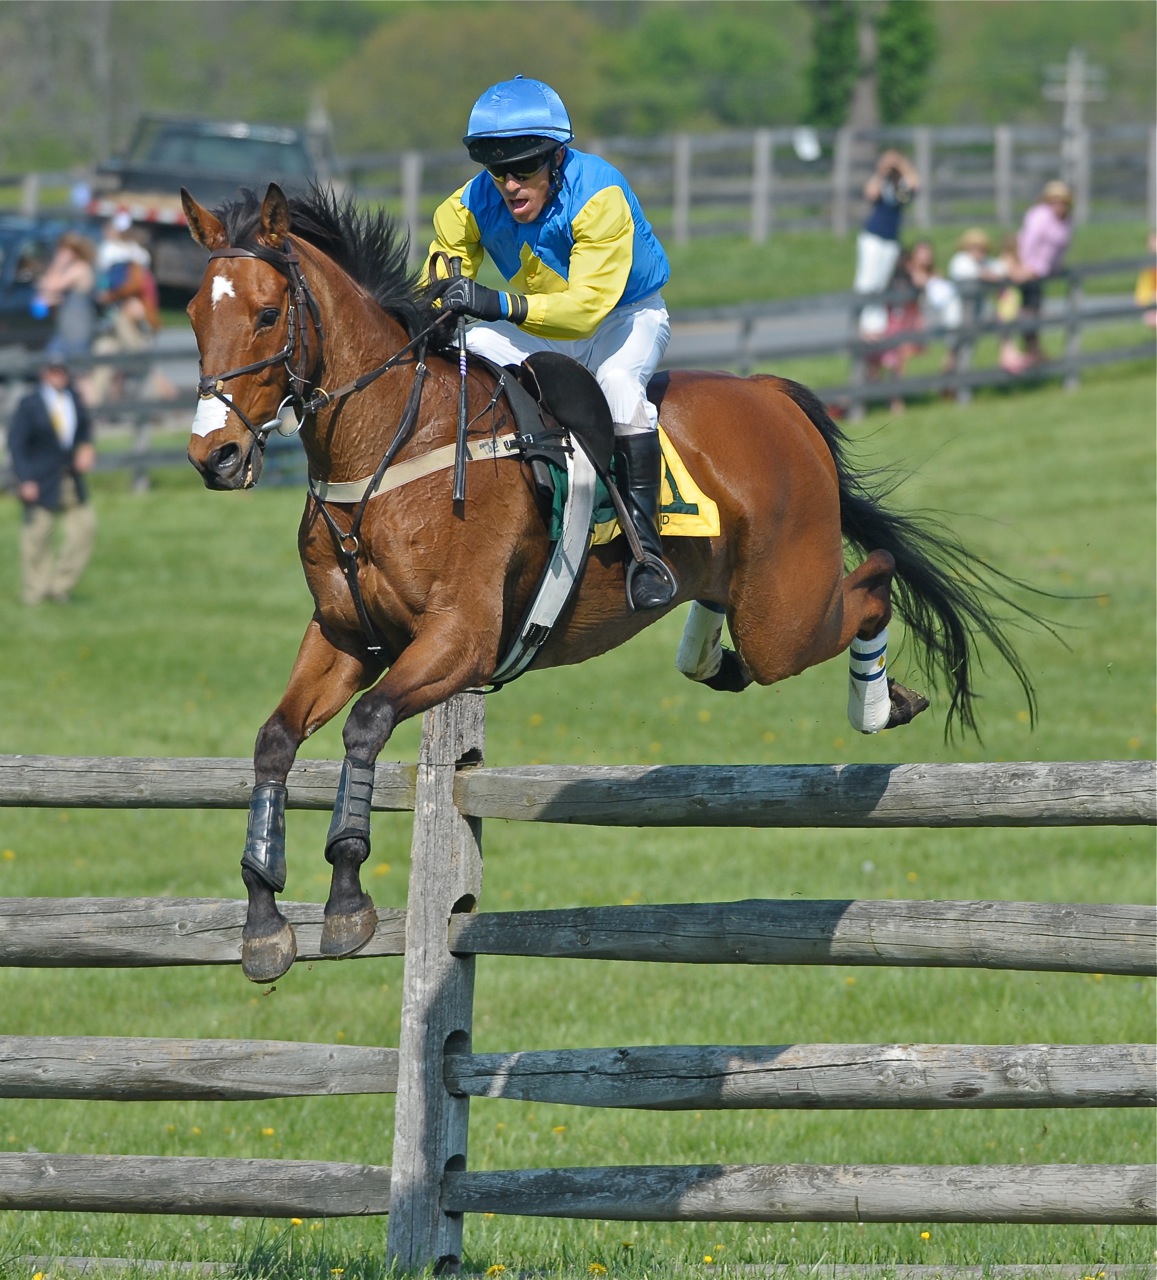 Virginia Blog Cup: DOUGLAS LEES' PHOTOS OF THE MARYLAND HUNT CUP